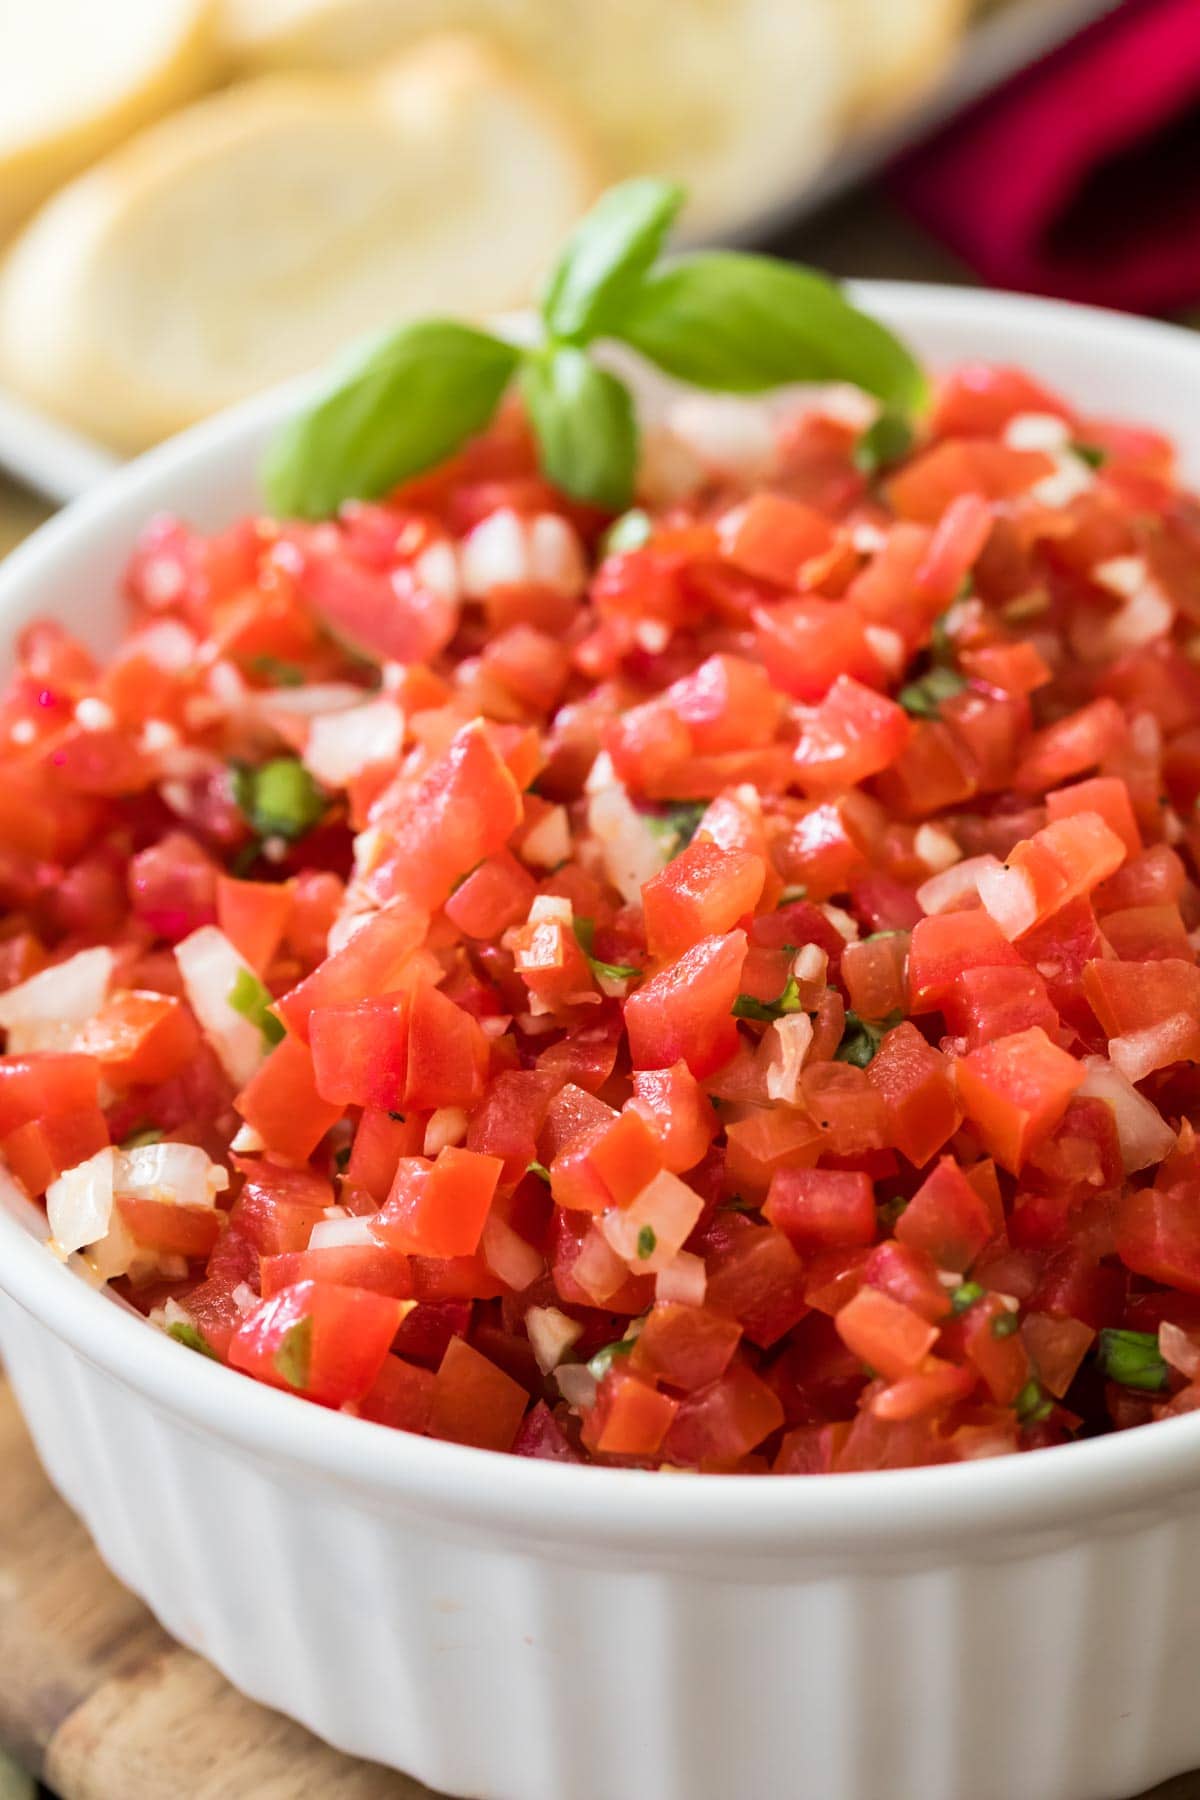 chopped tomato, garlic, and basil topping for toasted bread